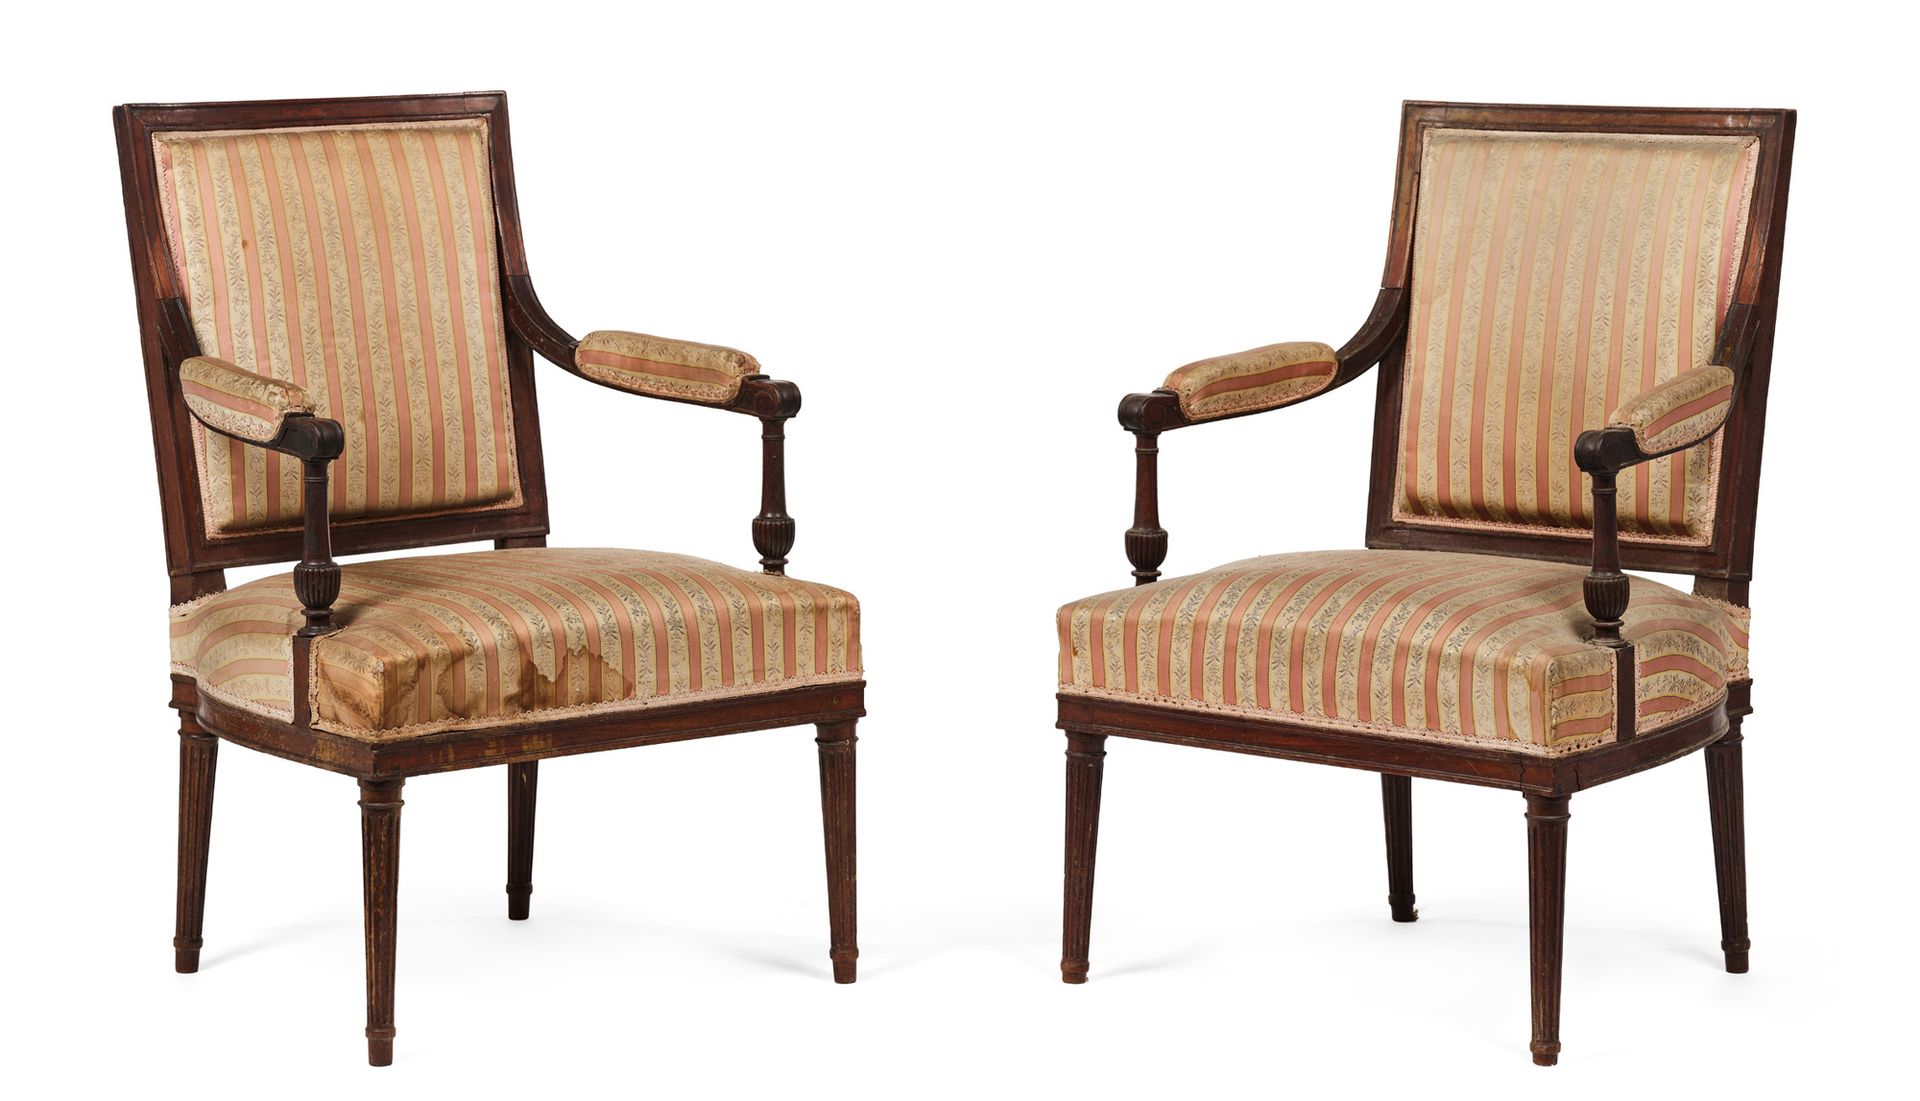 GEORGES JACOB (1739 - 1814) Rare pair of mahogany armchairs, the rectangular bac&hellip;